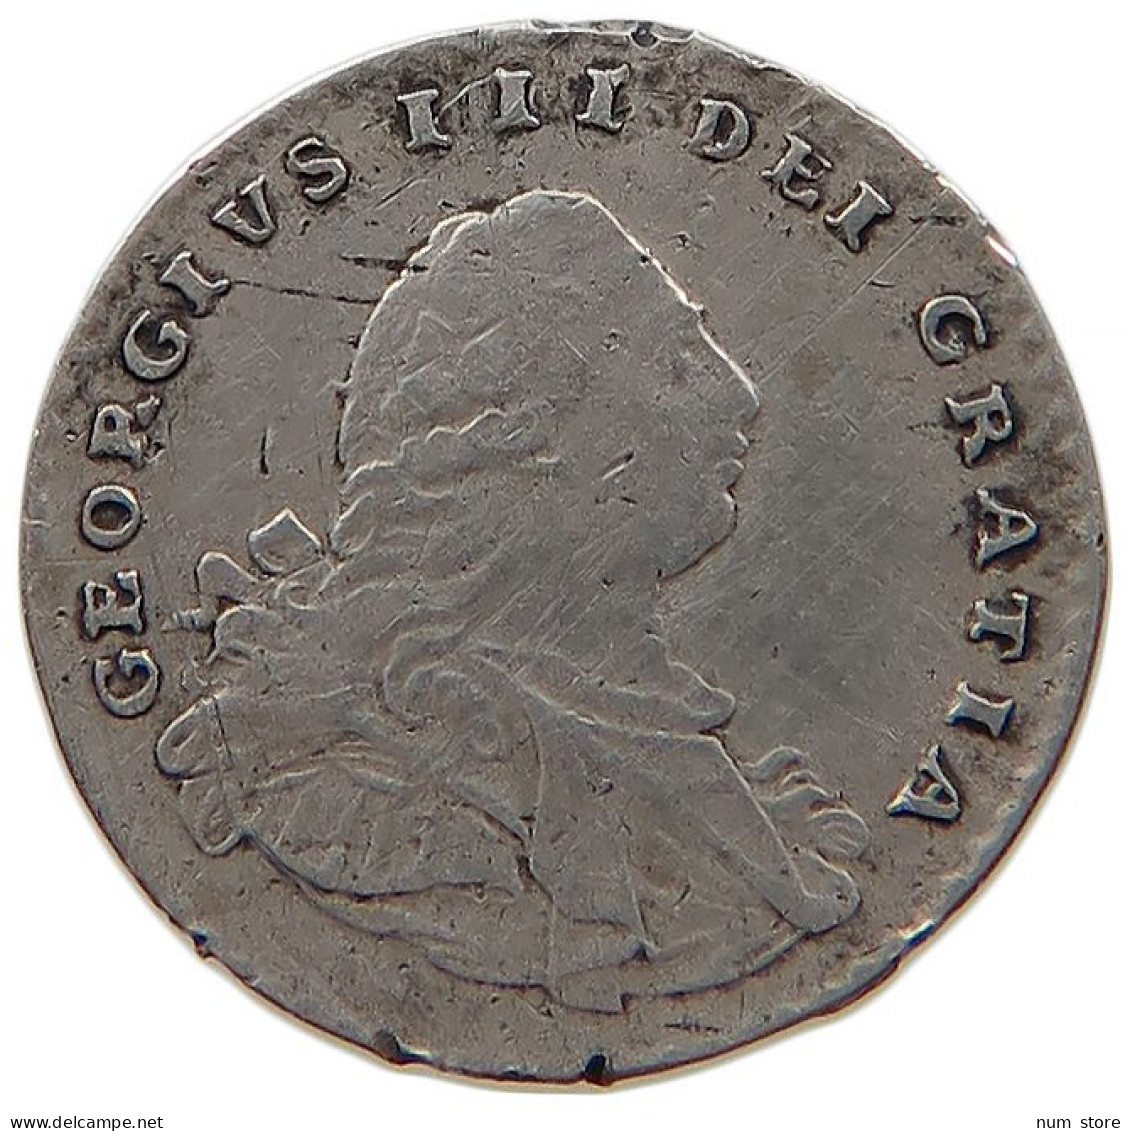 GREAT BRITAIN PENNY MAUNDY 1800 GEORGE III. 1760-1820 #t011 0387 - C. 1 Penny